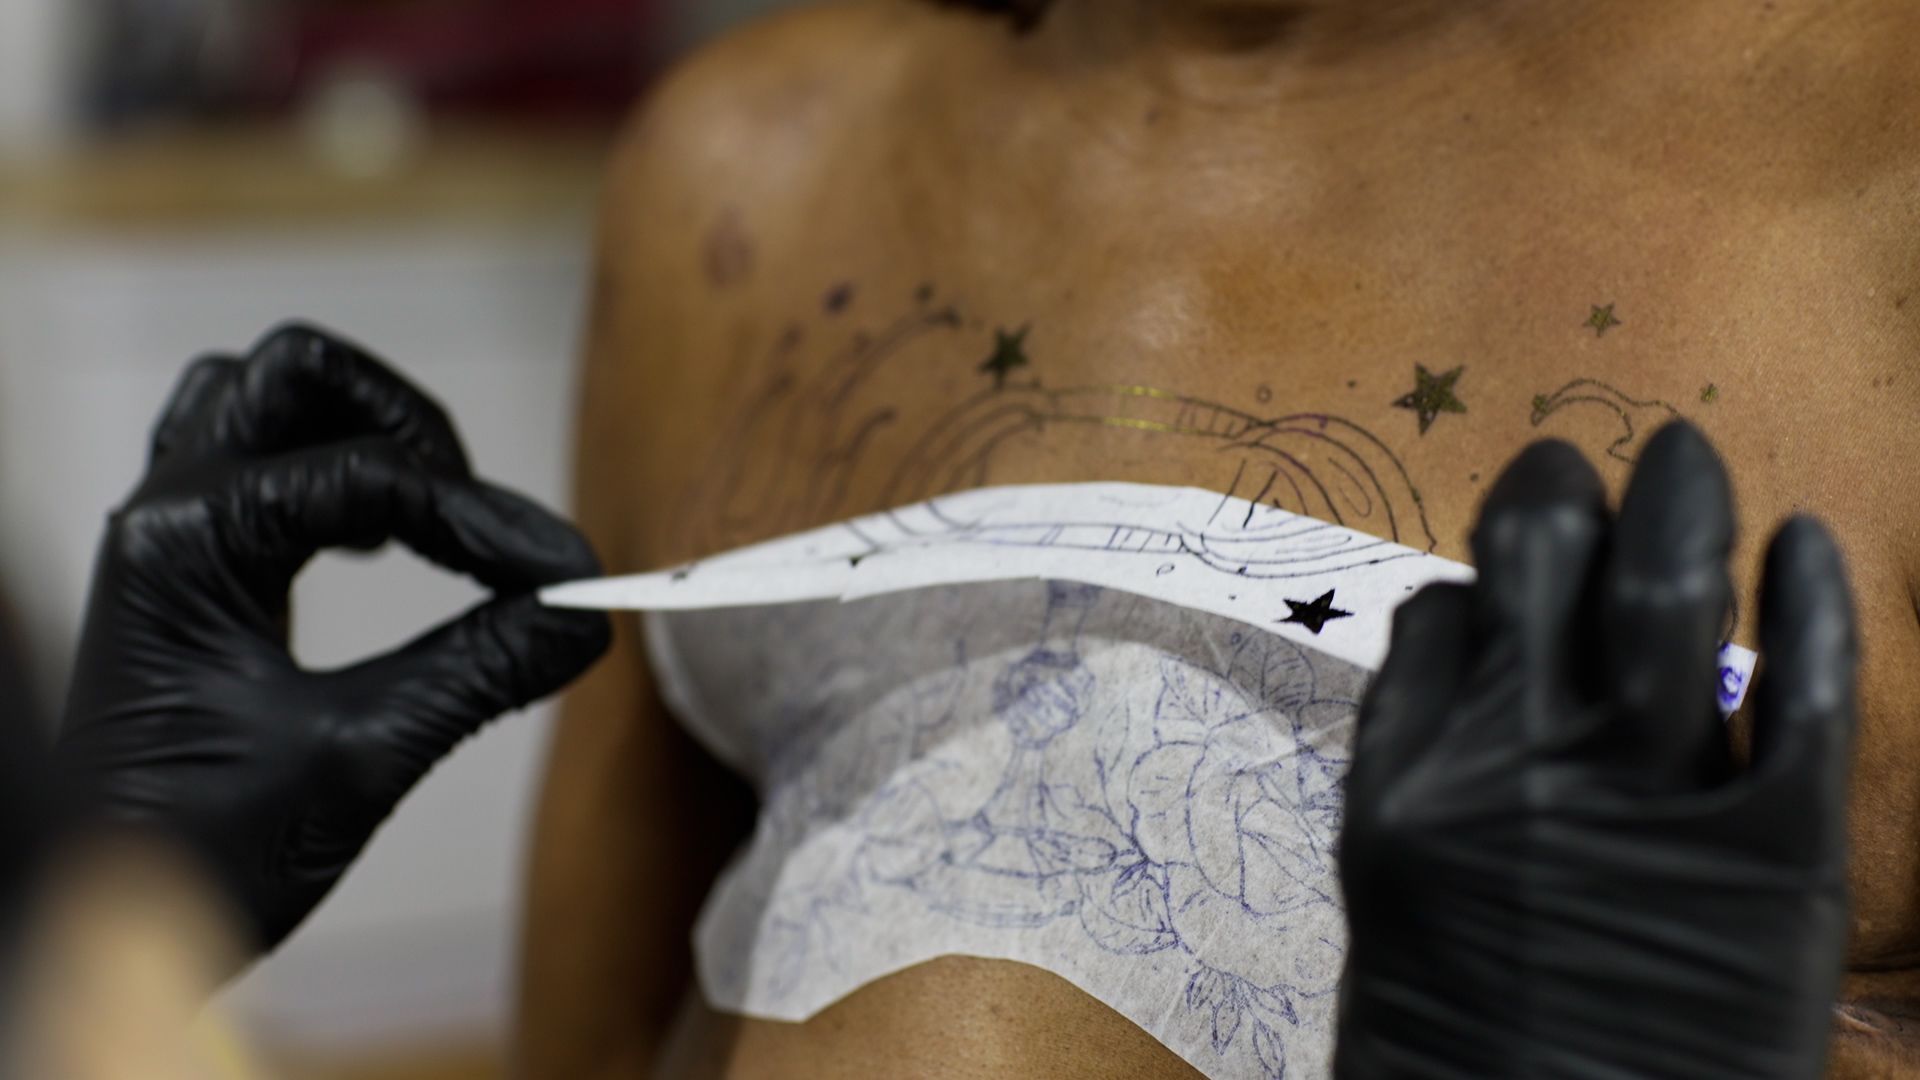 Getting a mastectomy tattoo has transformed how we feel about our bodies